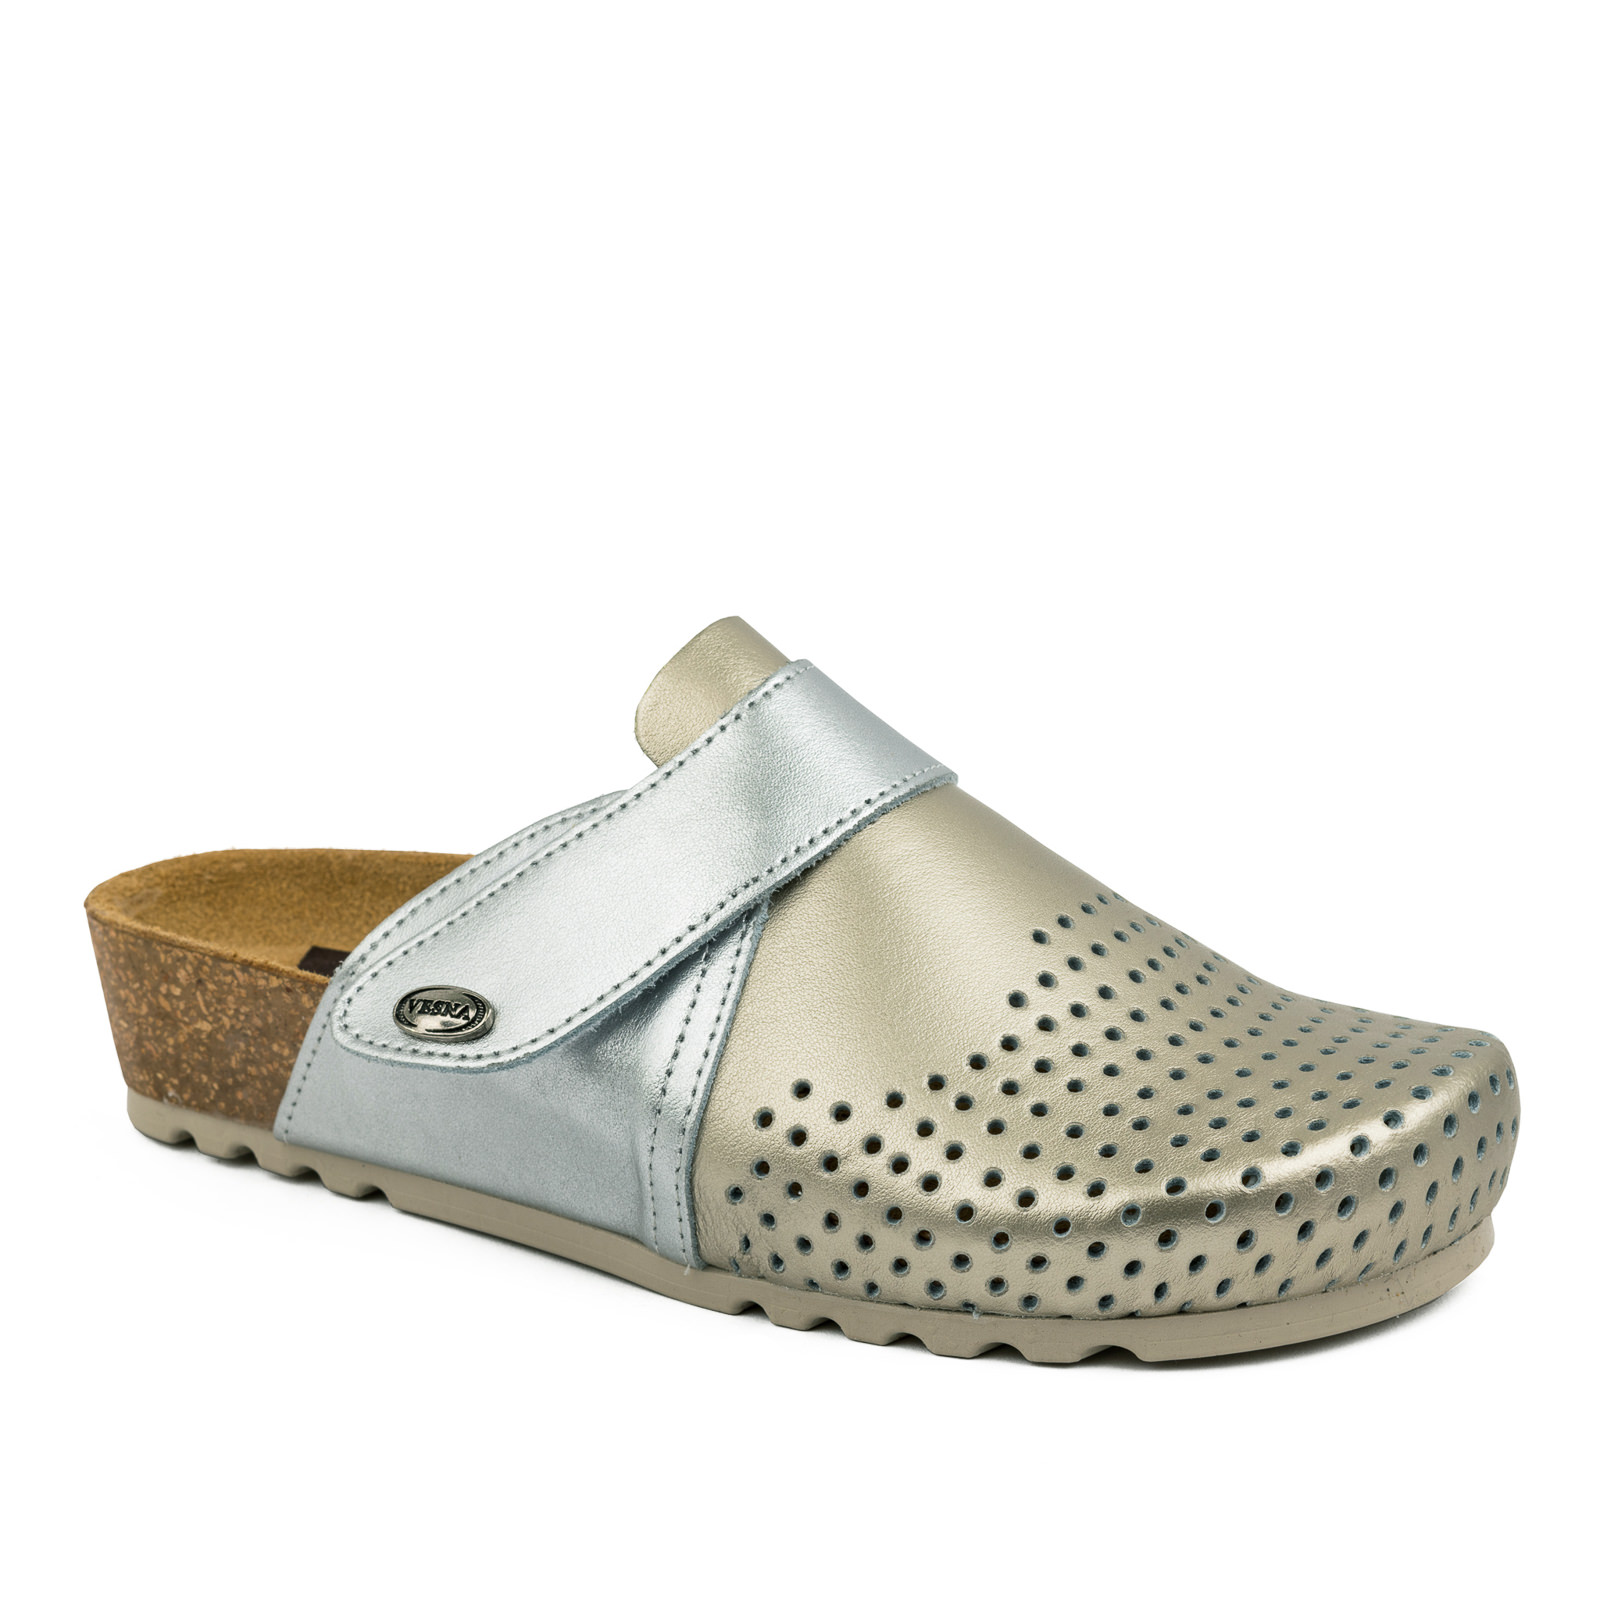 ANATOMIC LEATHER CLOGS WITH VELCRO BAND - SILVER/GOLD